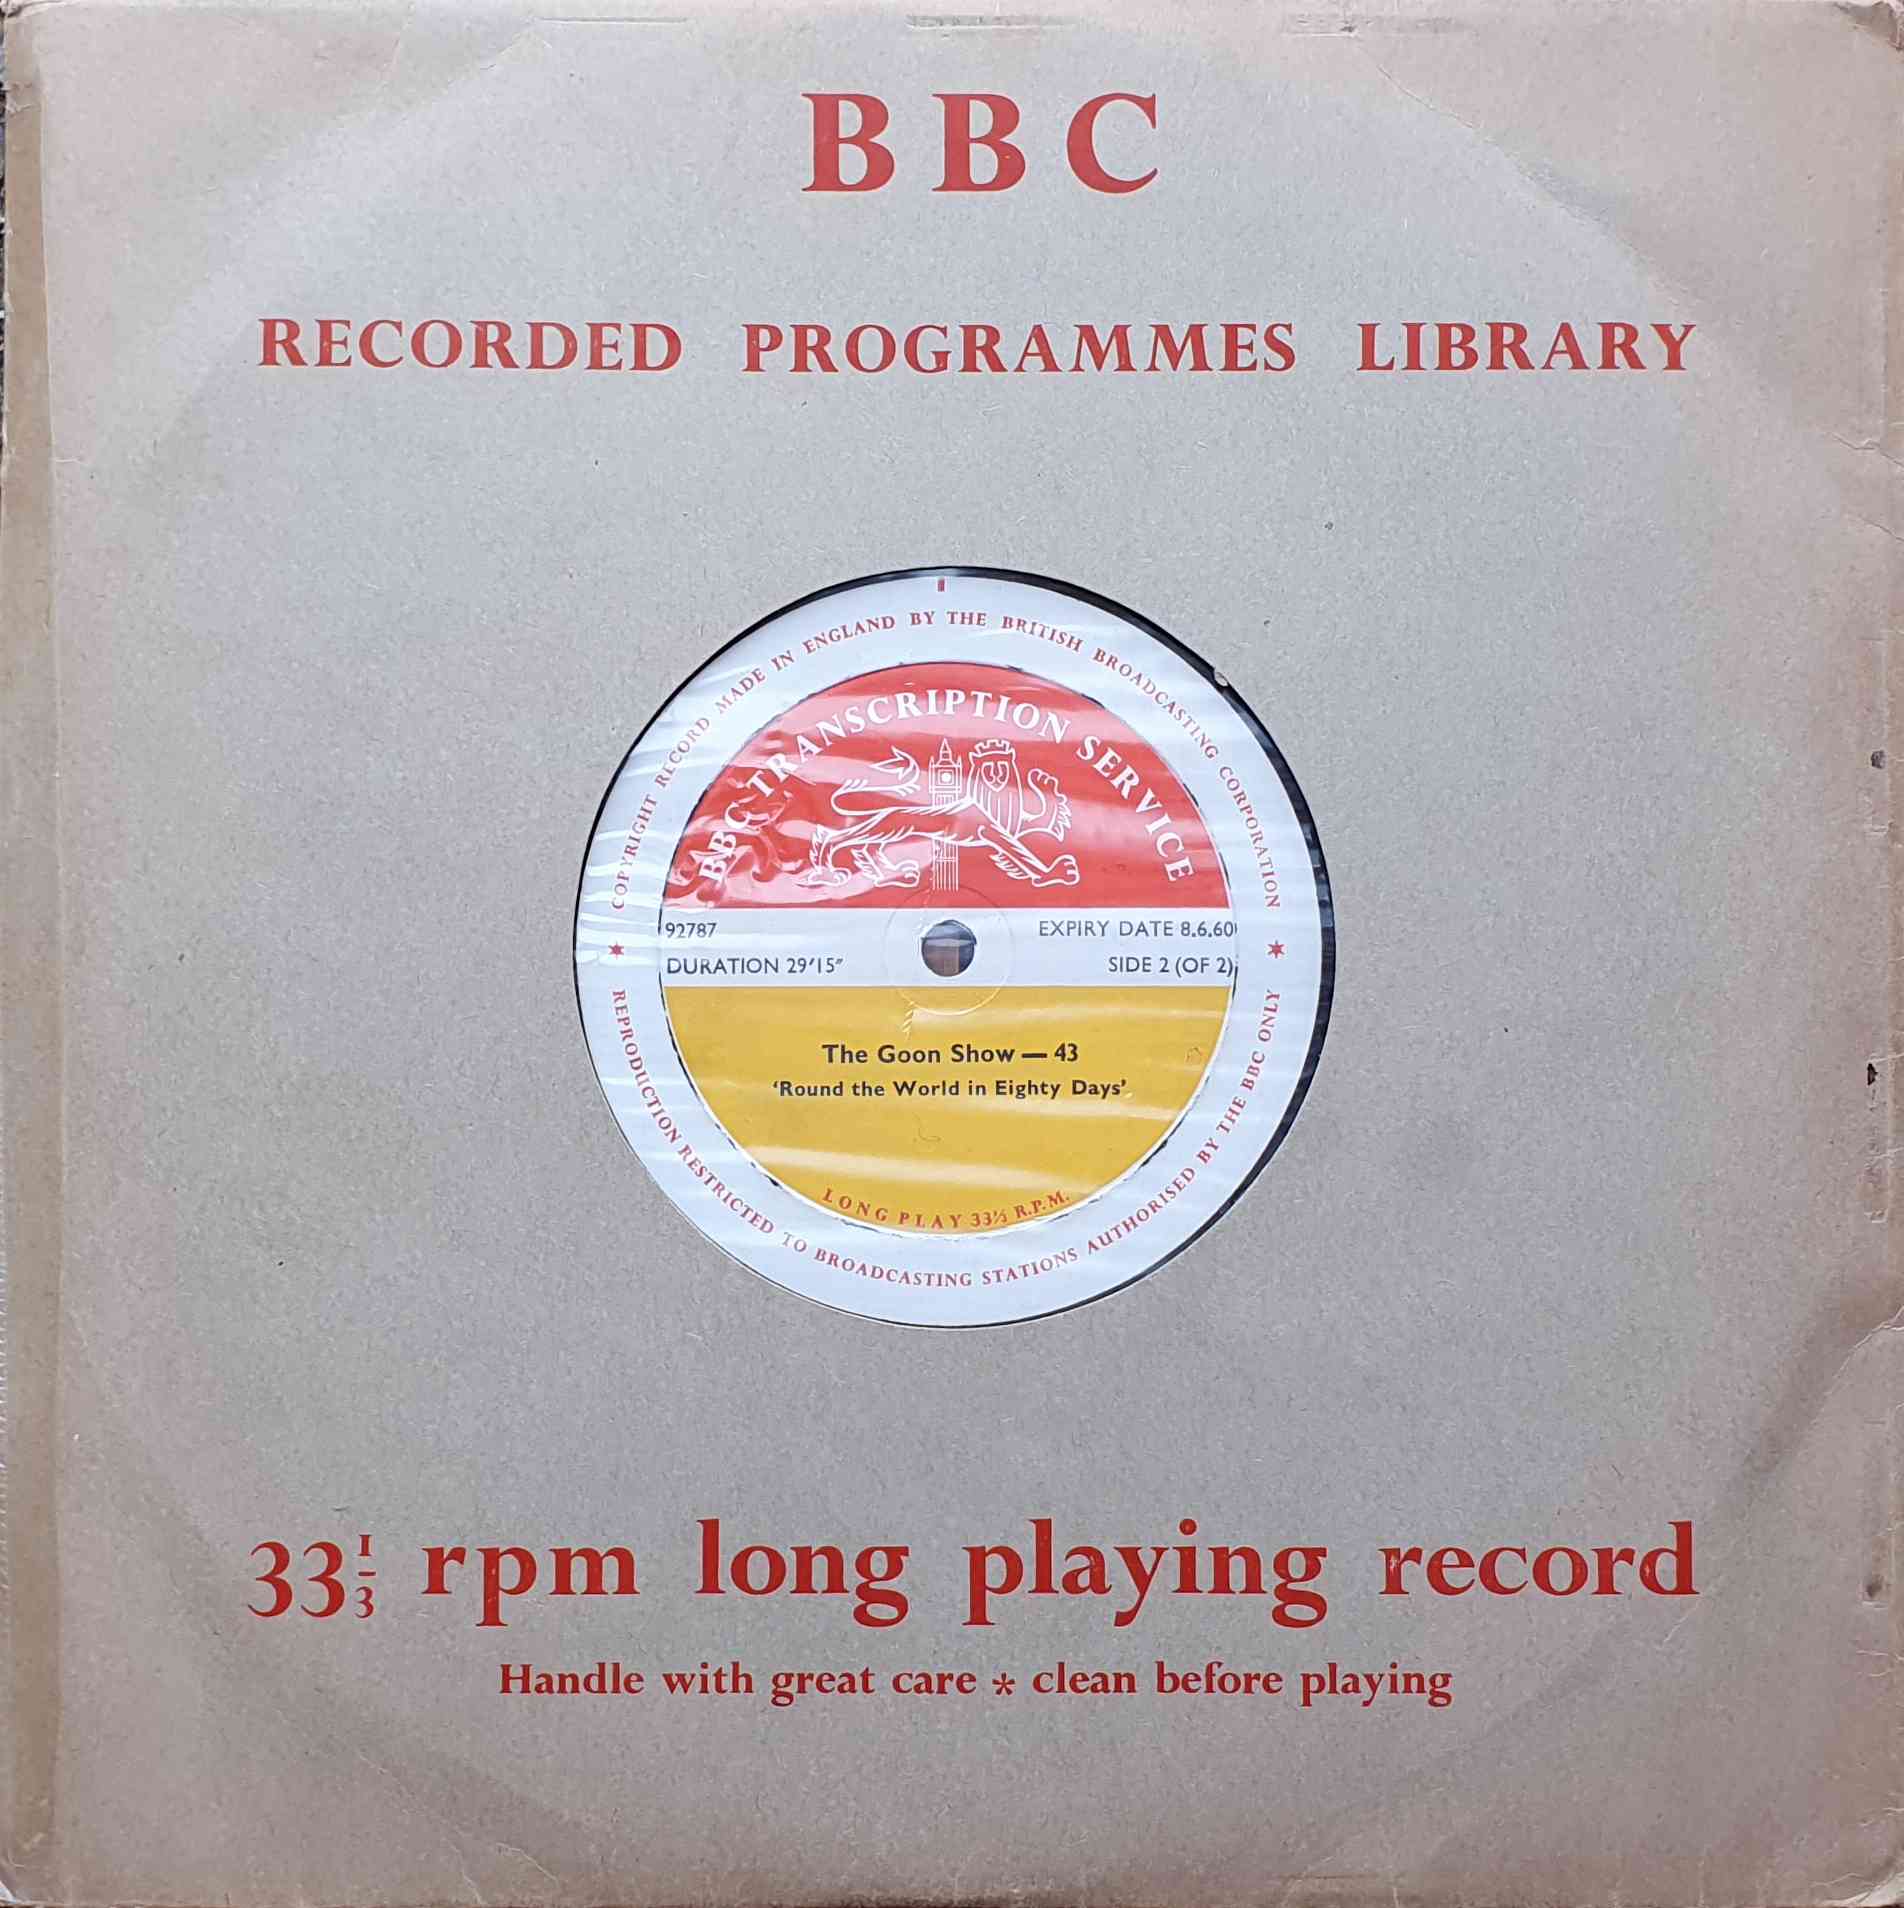 Picture of The Goon Show - 43 / 44 (Side 2 of 2) by artist Unknown from the BBC 10inches - Records and Tapes library